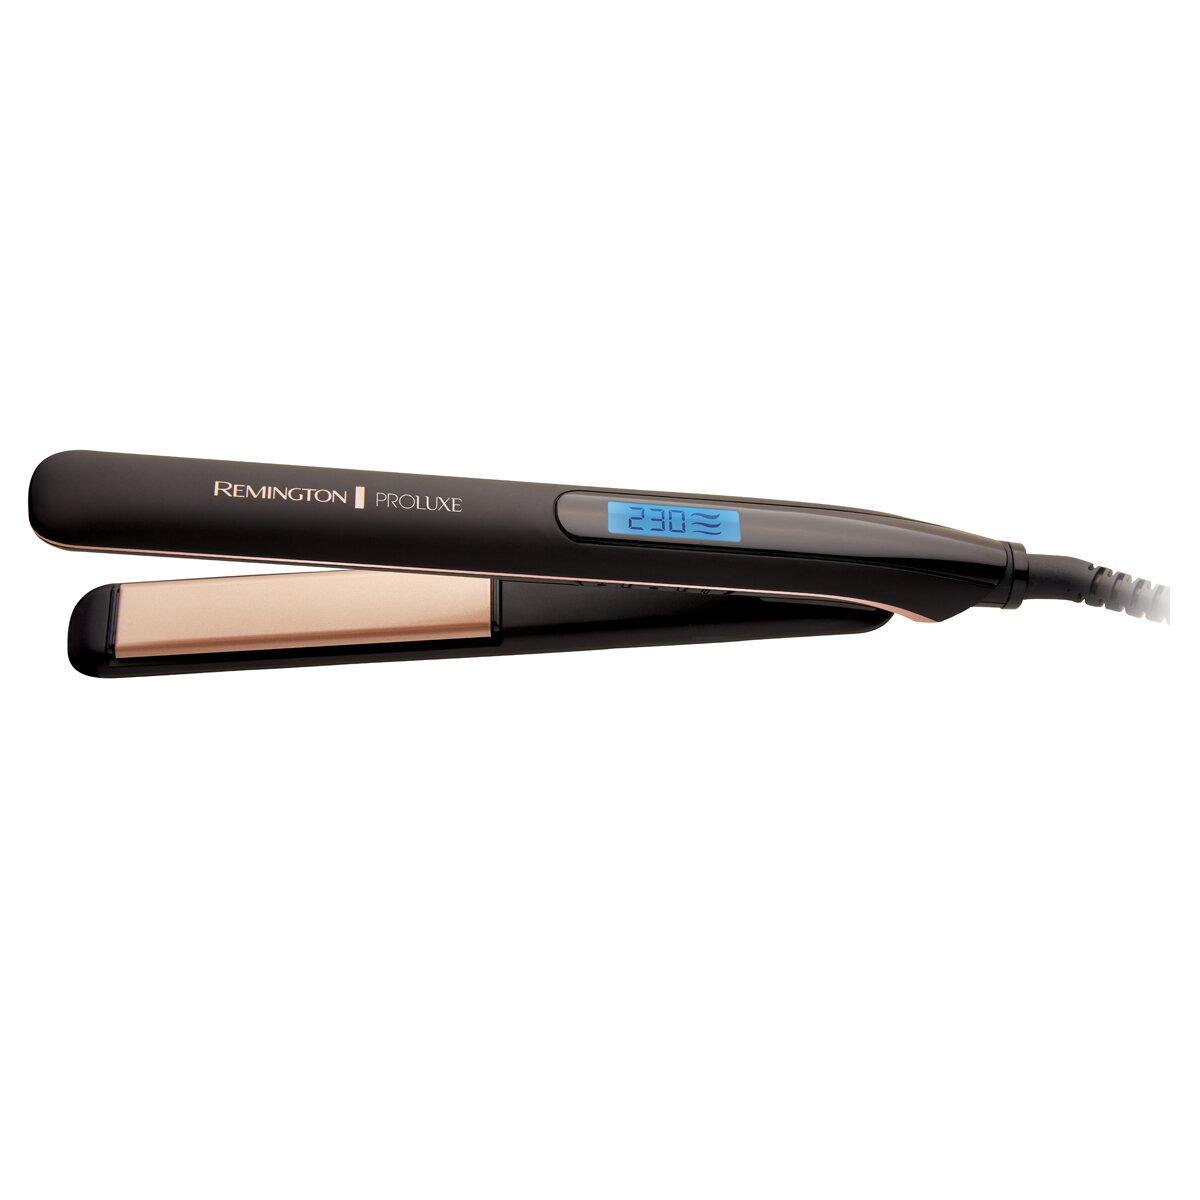 Remington PROluxe Salon Dryer and Straightener Review